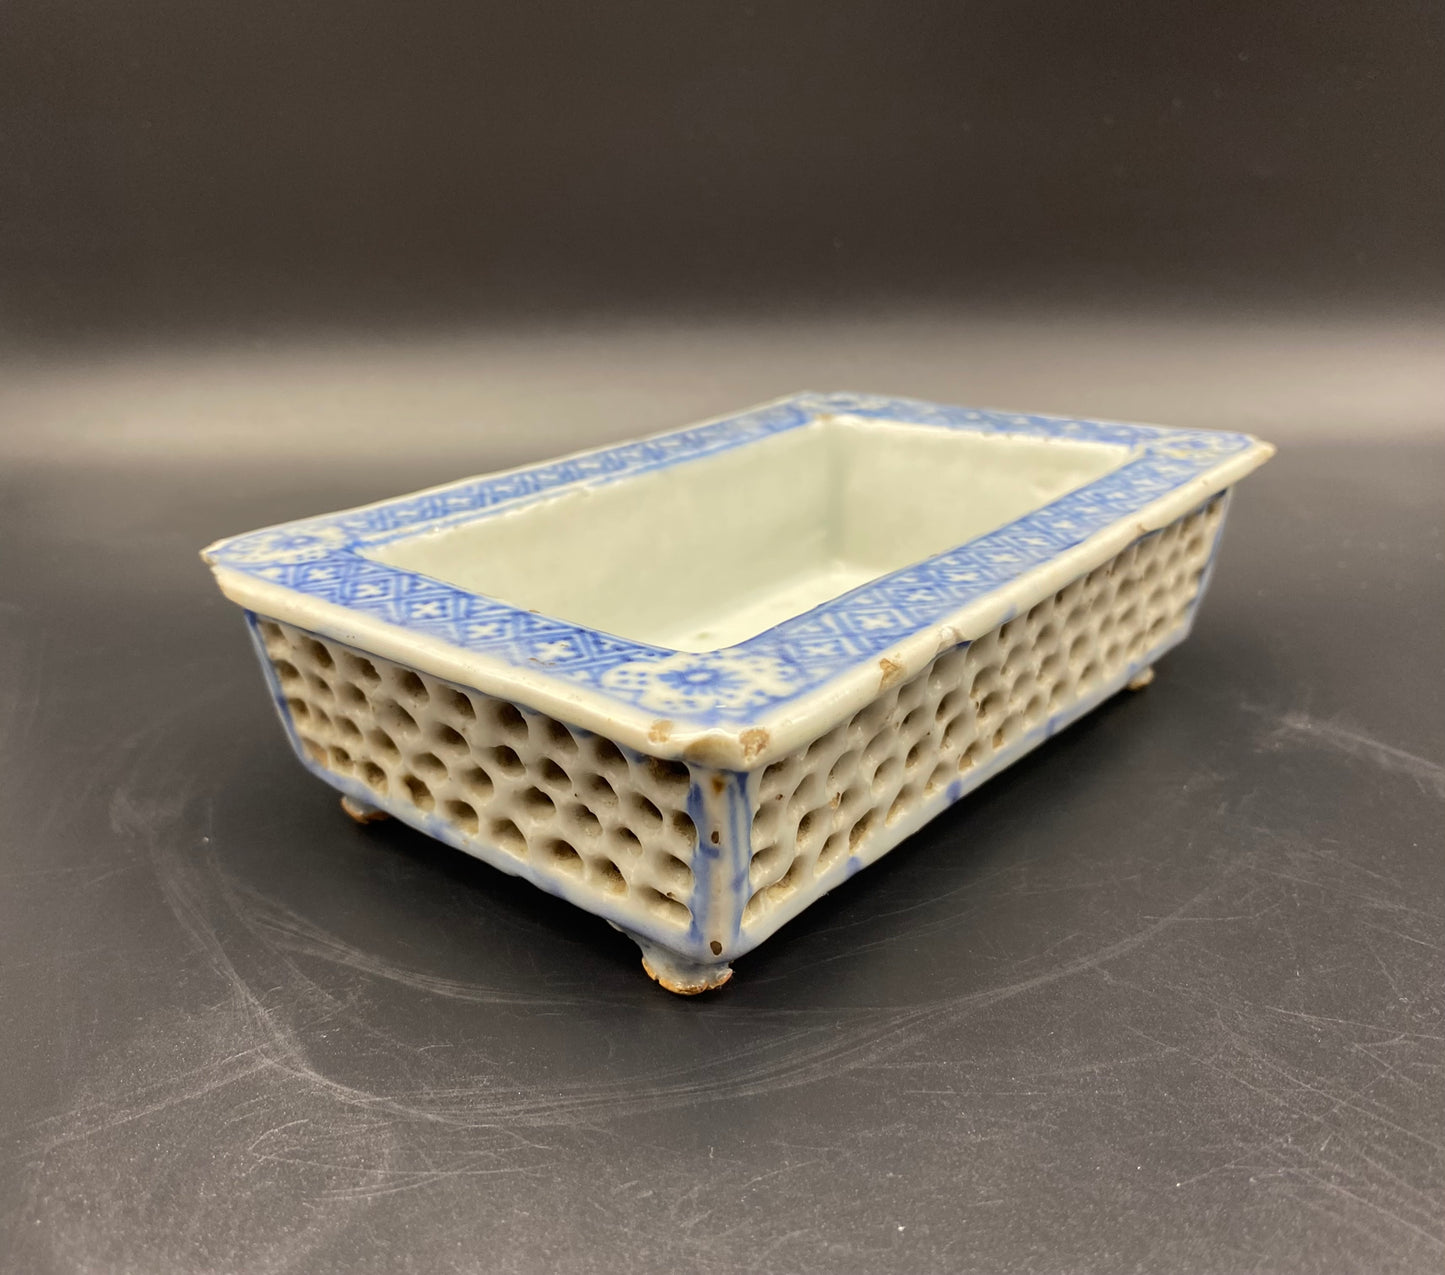 Buy Antiques UK Chinese Qing Reticulated Porcelain Planter / Bonsai Tree Pot